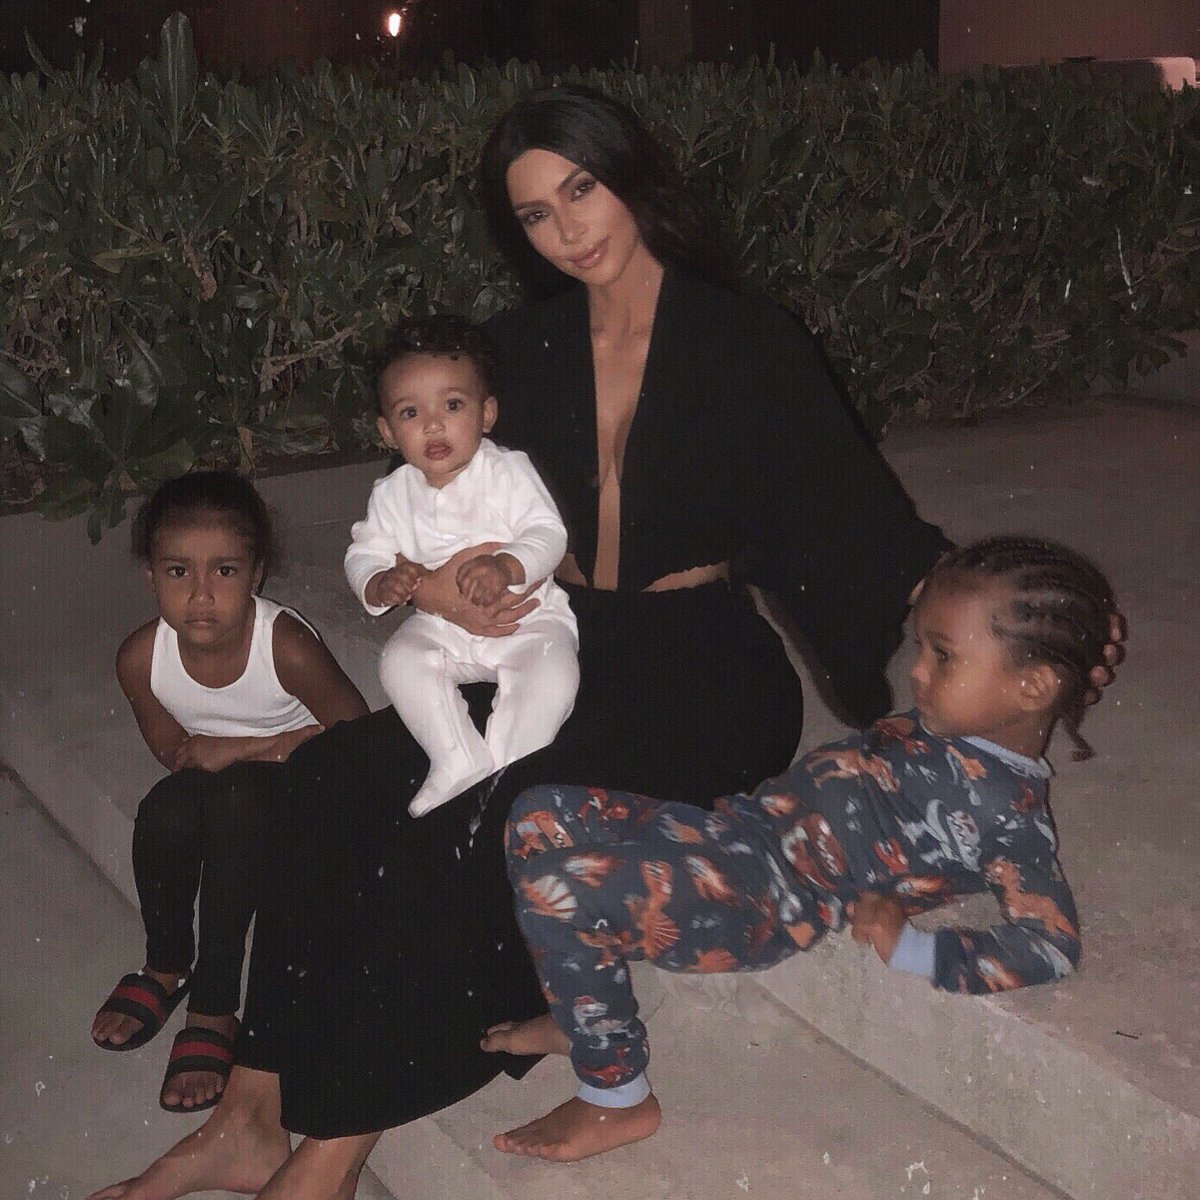 Entertainment News Roundup: Kim and Kanye expecting fourth child; Netflix pulls comedy show episode in Saudi Arabia